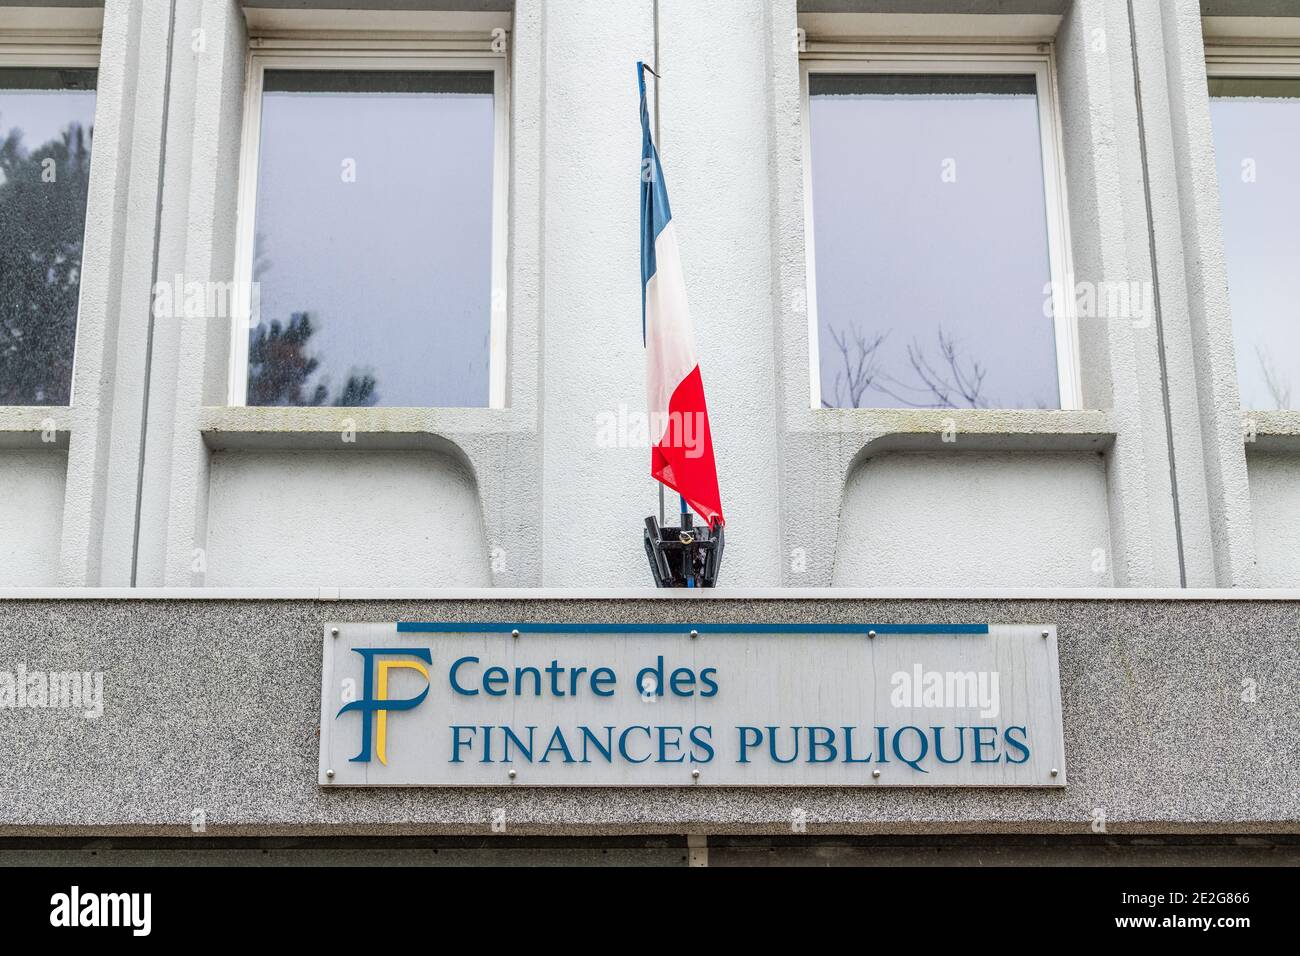 Calais, France - January 13,2020 : French public finances logo on a pole. The public Finance is a branch of the French Central Public Administration u Stock Photo